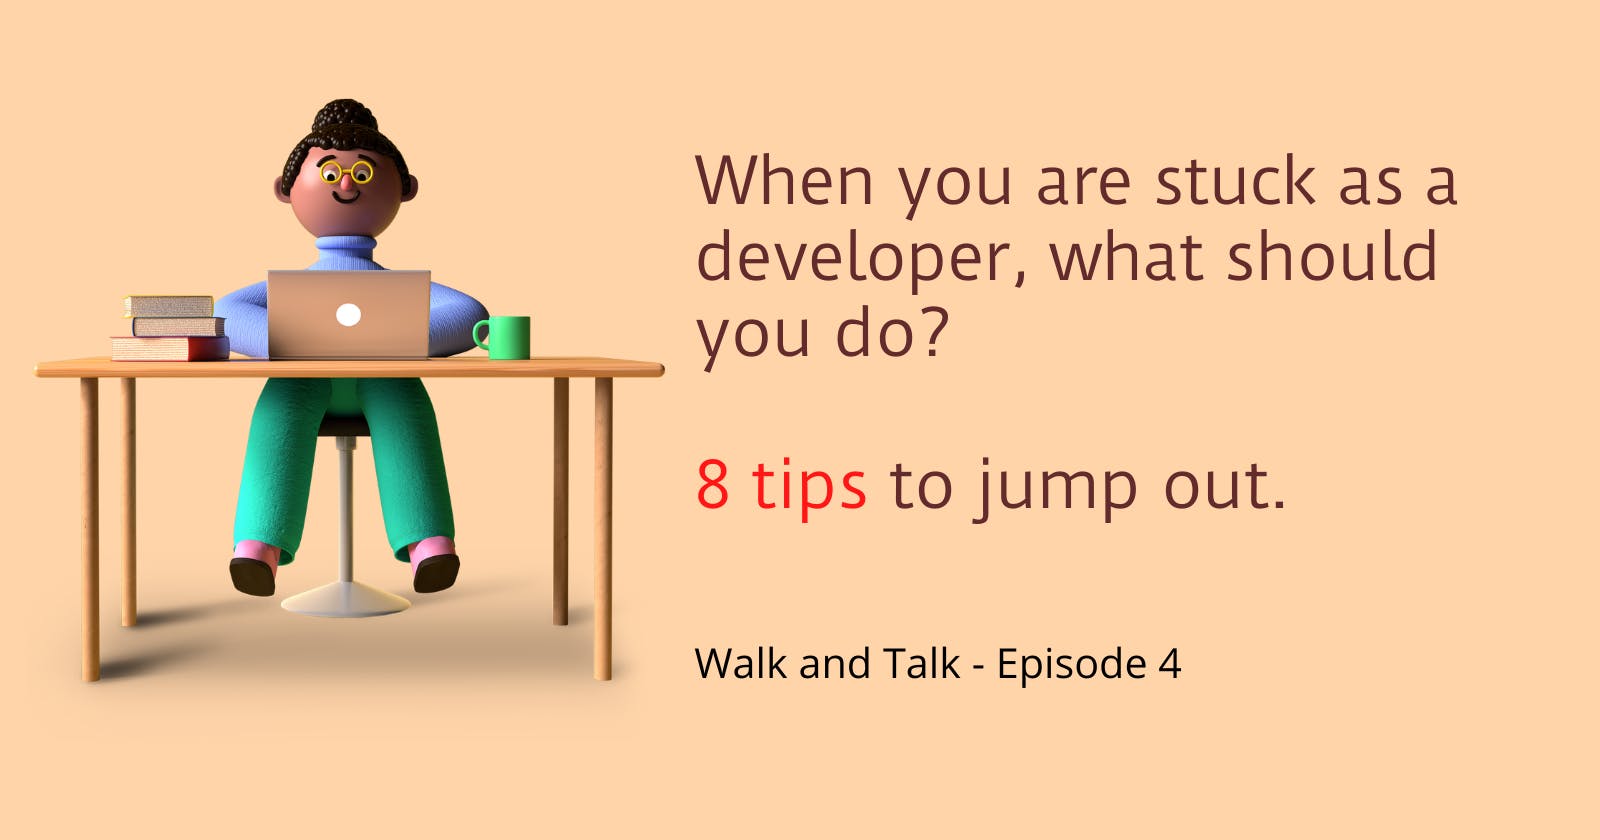 When you are stuck as a developer/software engineer, what do you do? 8 tips to jump out.